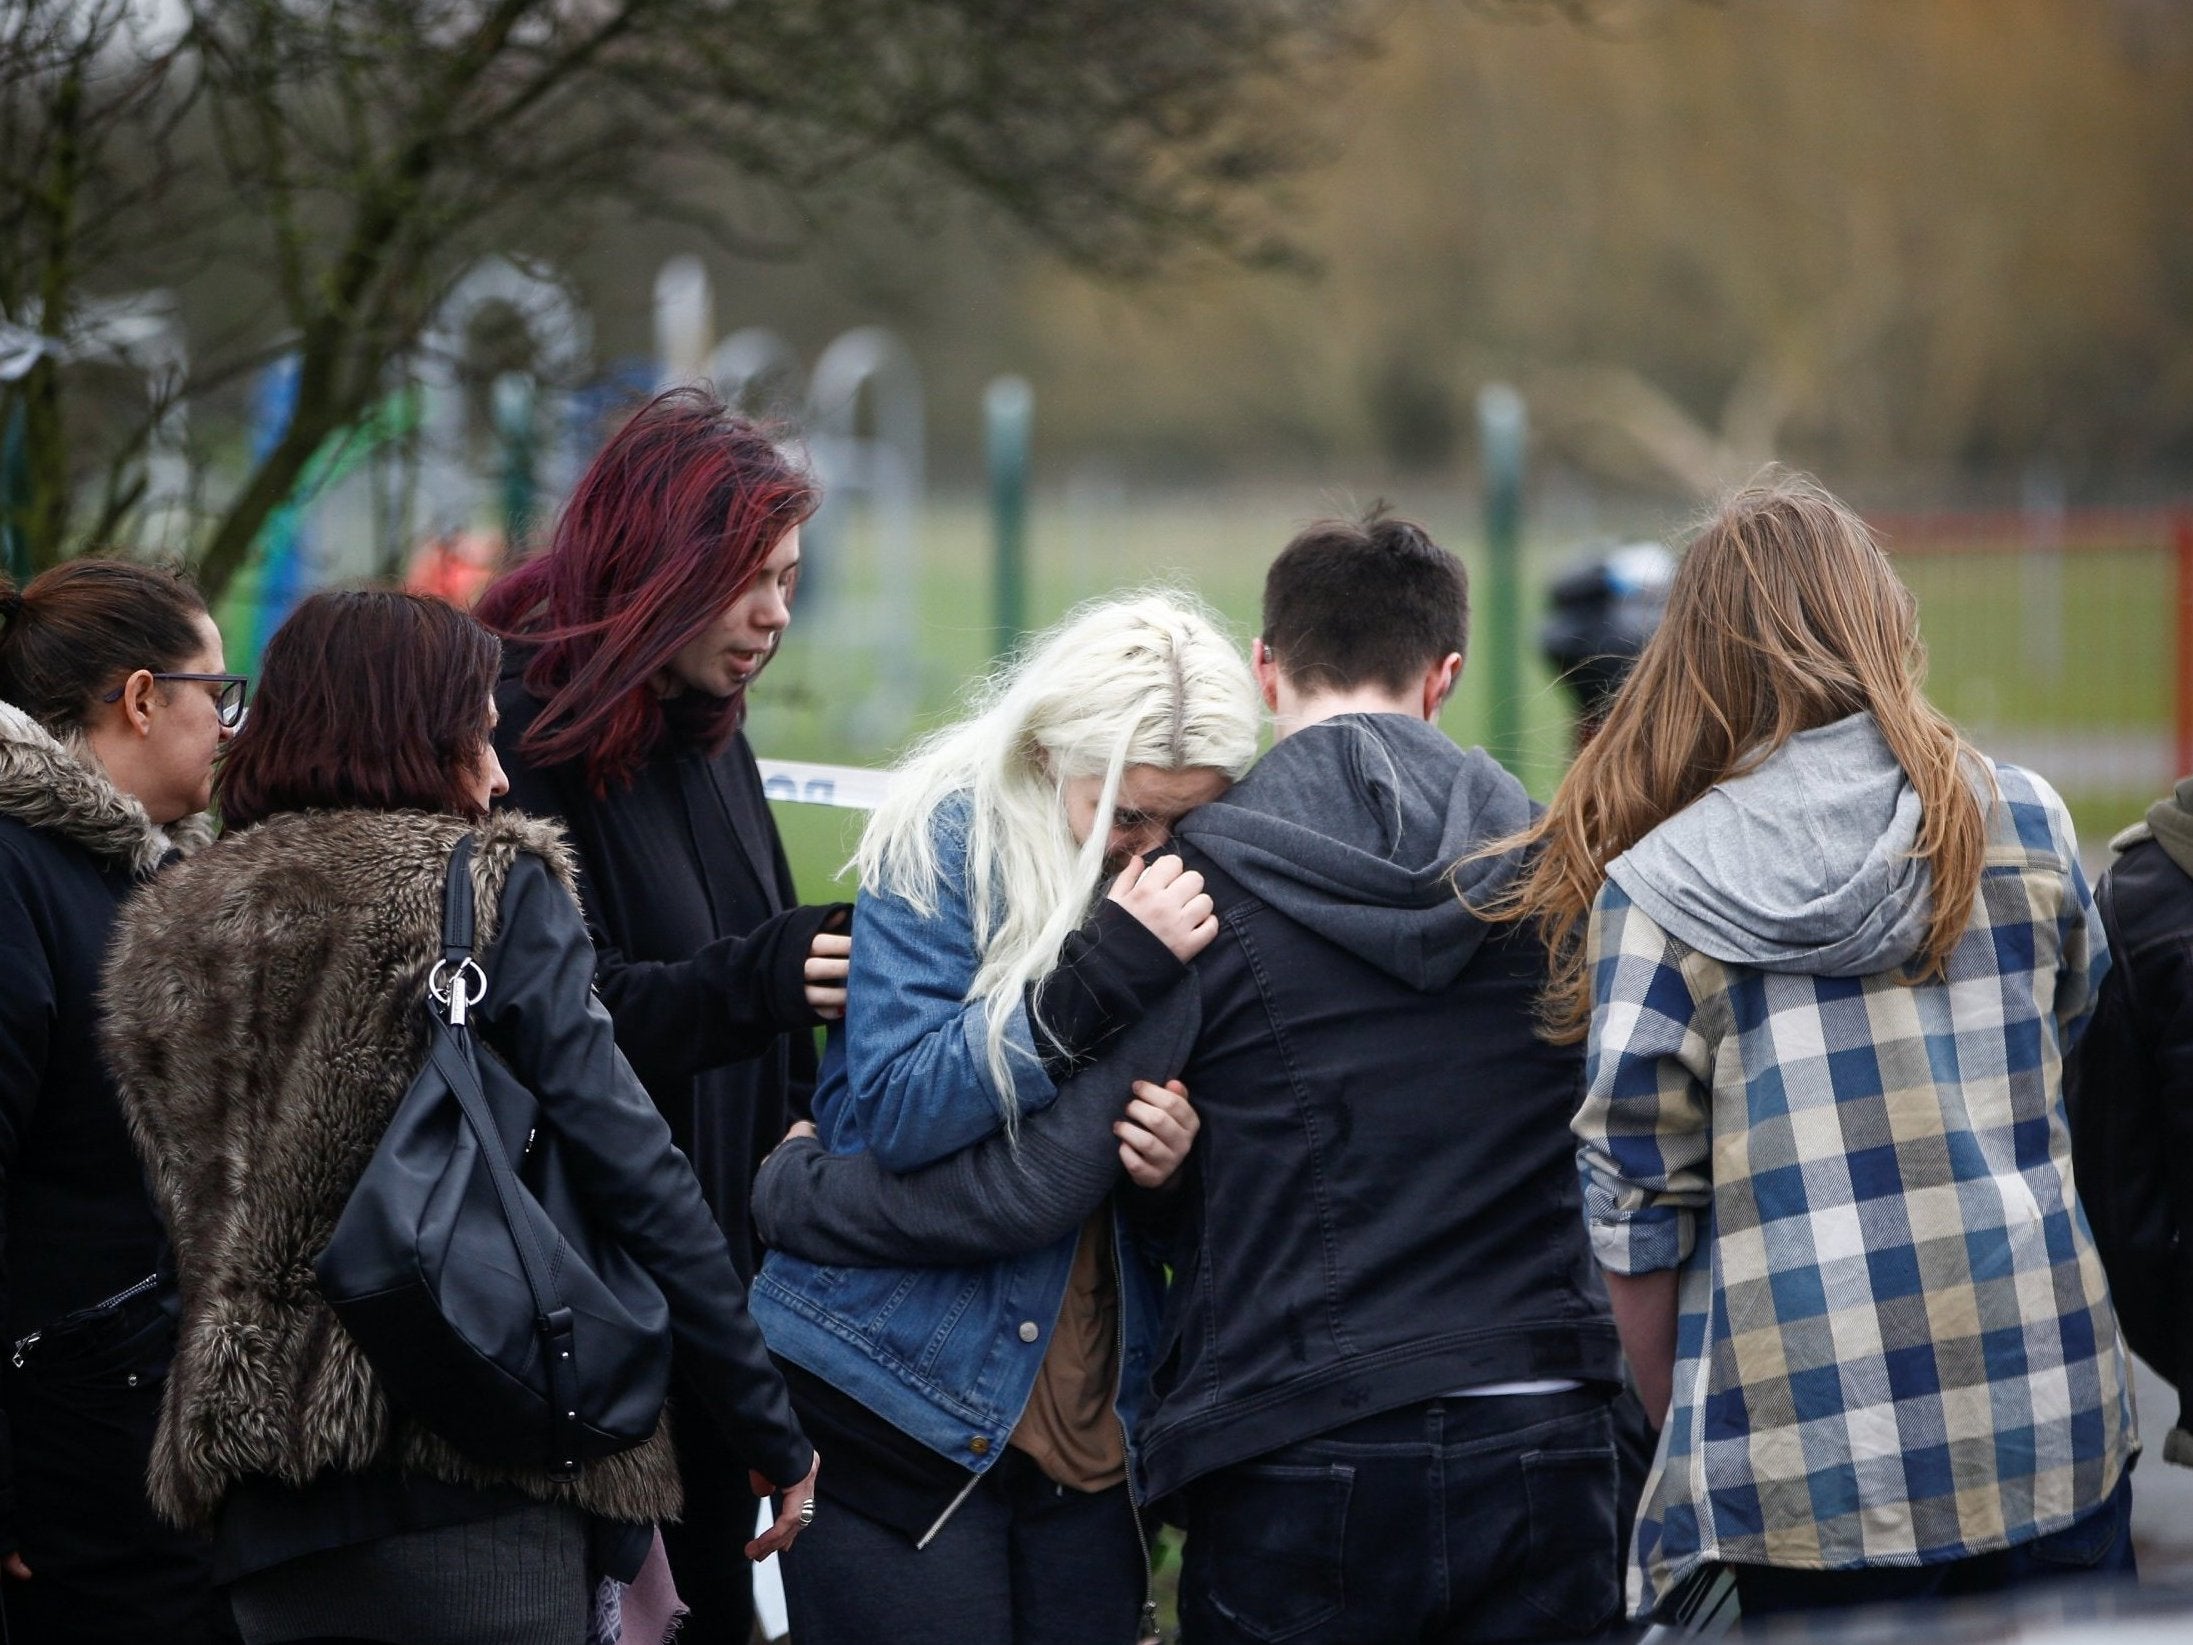 People visit the site near where 17-year-old Jodie Chesney was stabbed to death in Harold Hill, east London, on 1 March 2019.